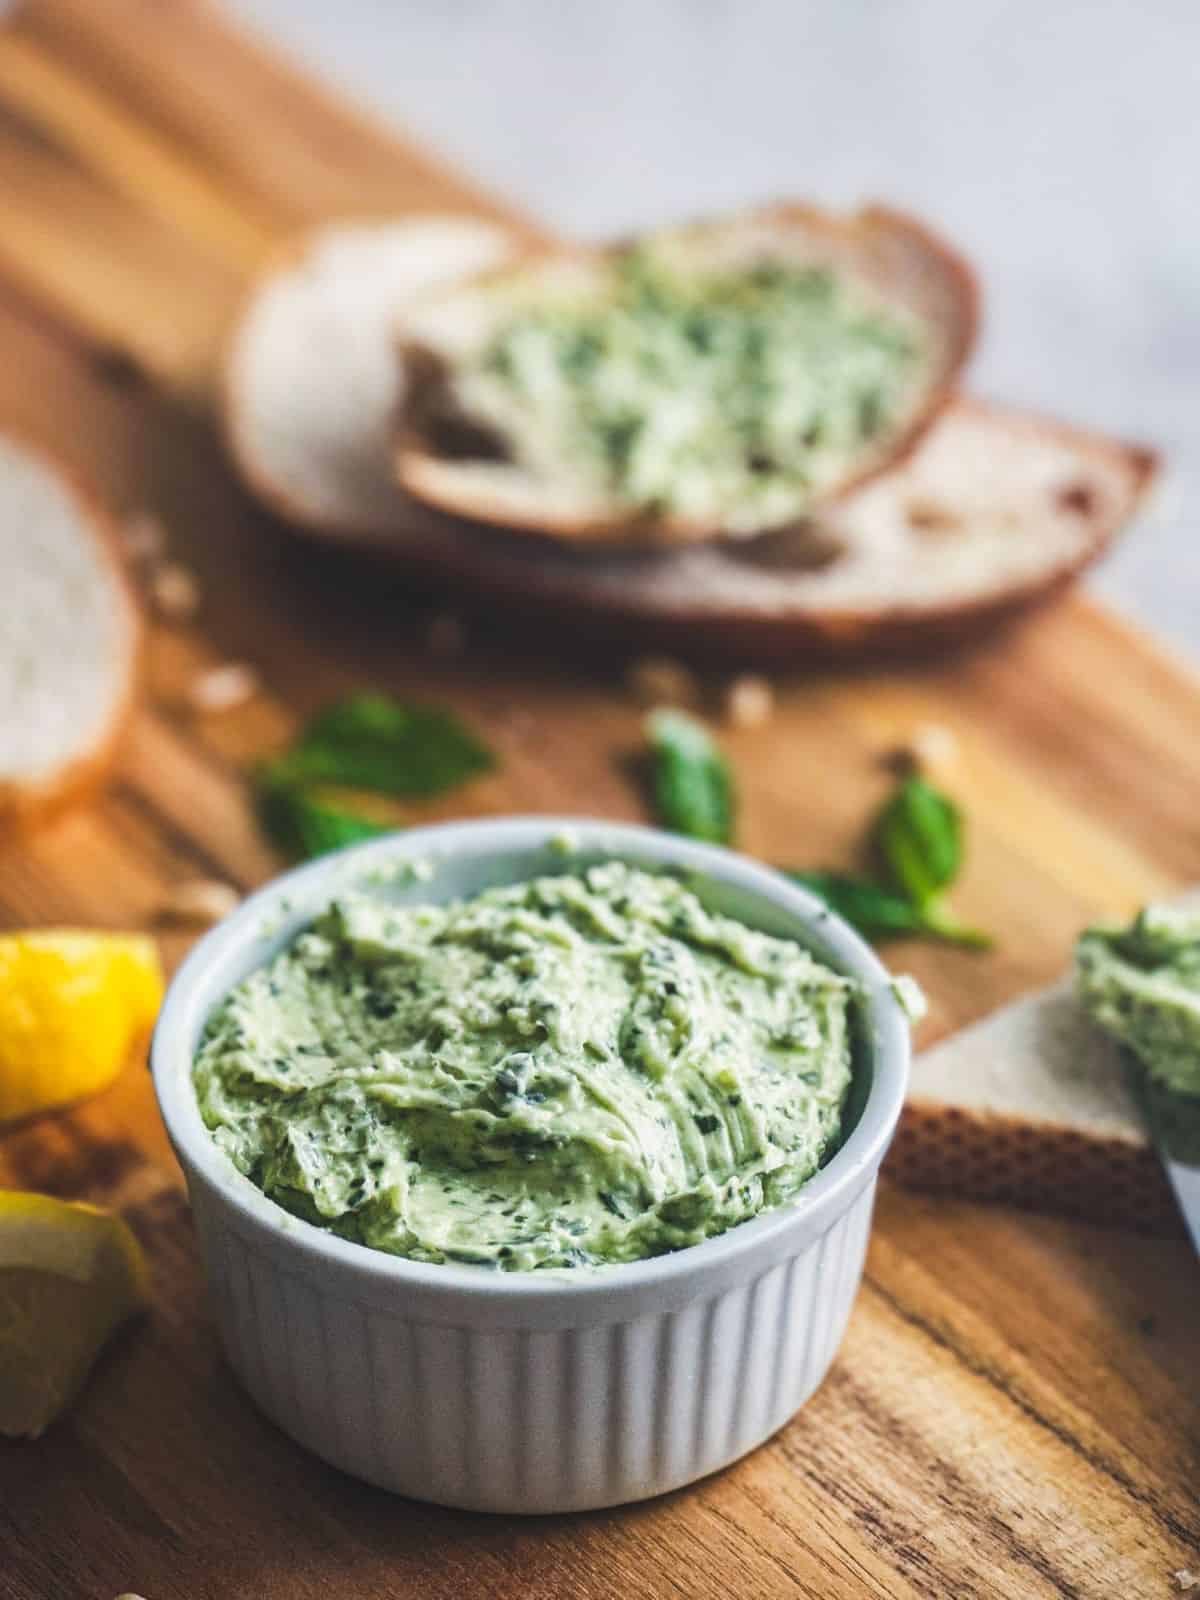 Whipped basil pesto butter in a white ramekin with bread and basil leaves in the background.